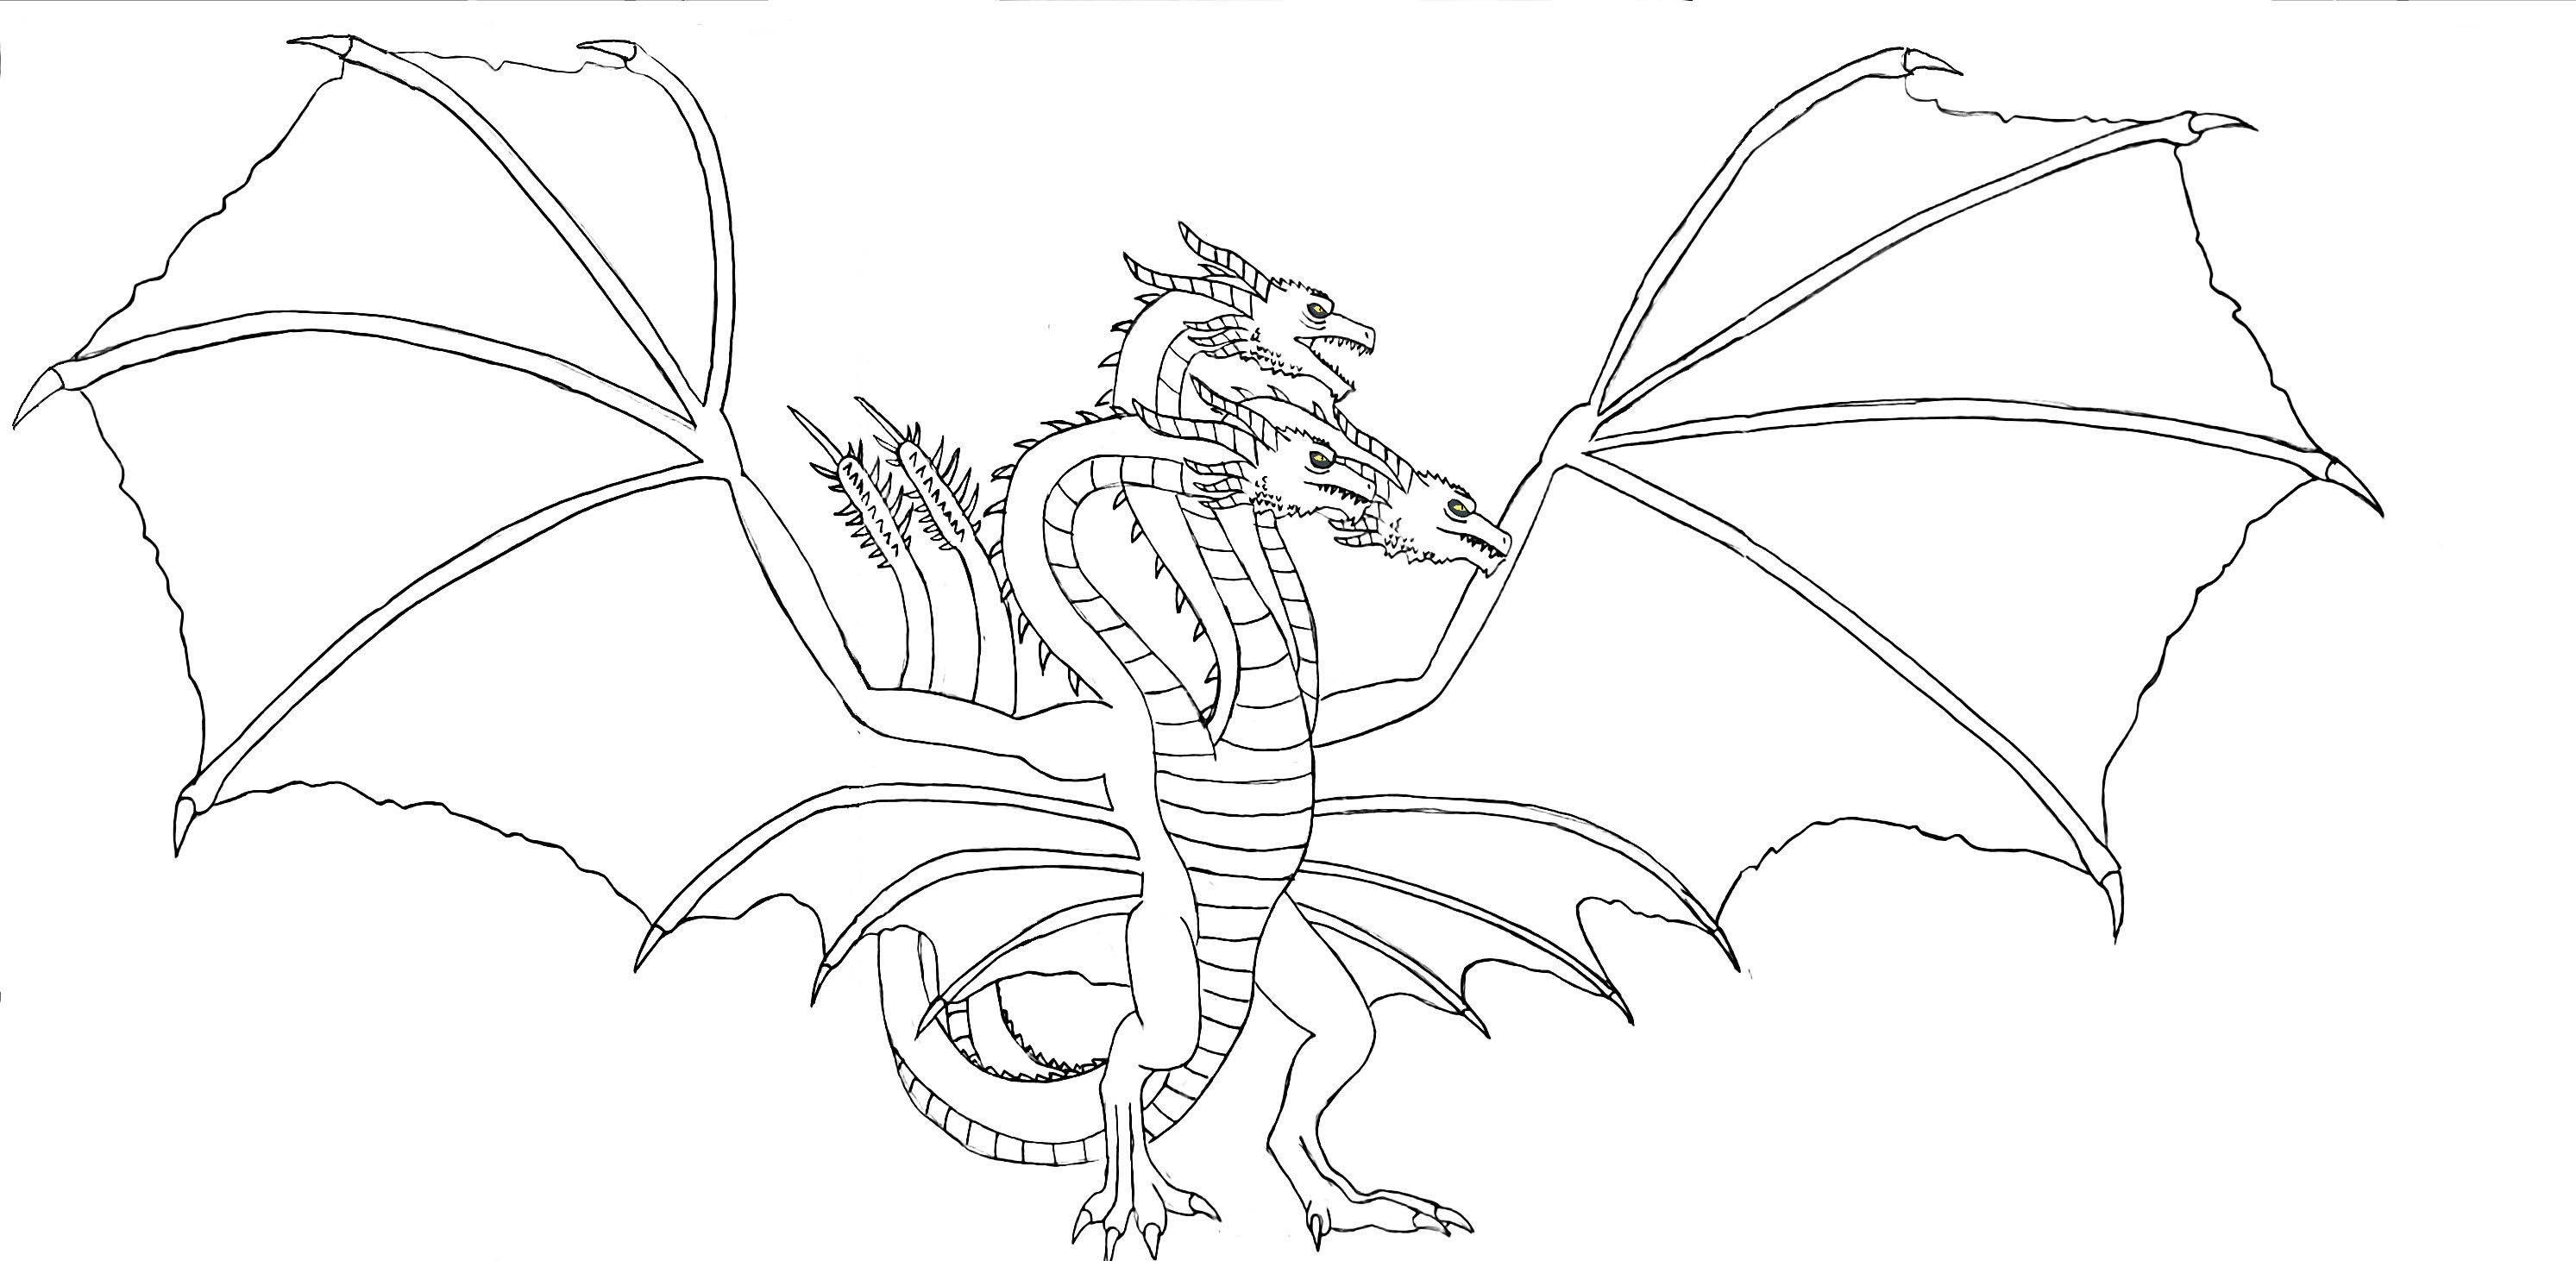 Godzilla Vs. King Ghidorah Coloring Pages Coloring Pages